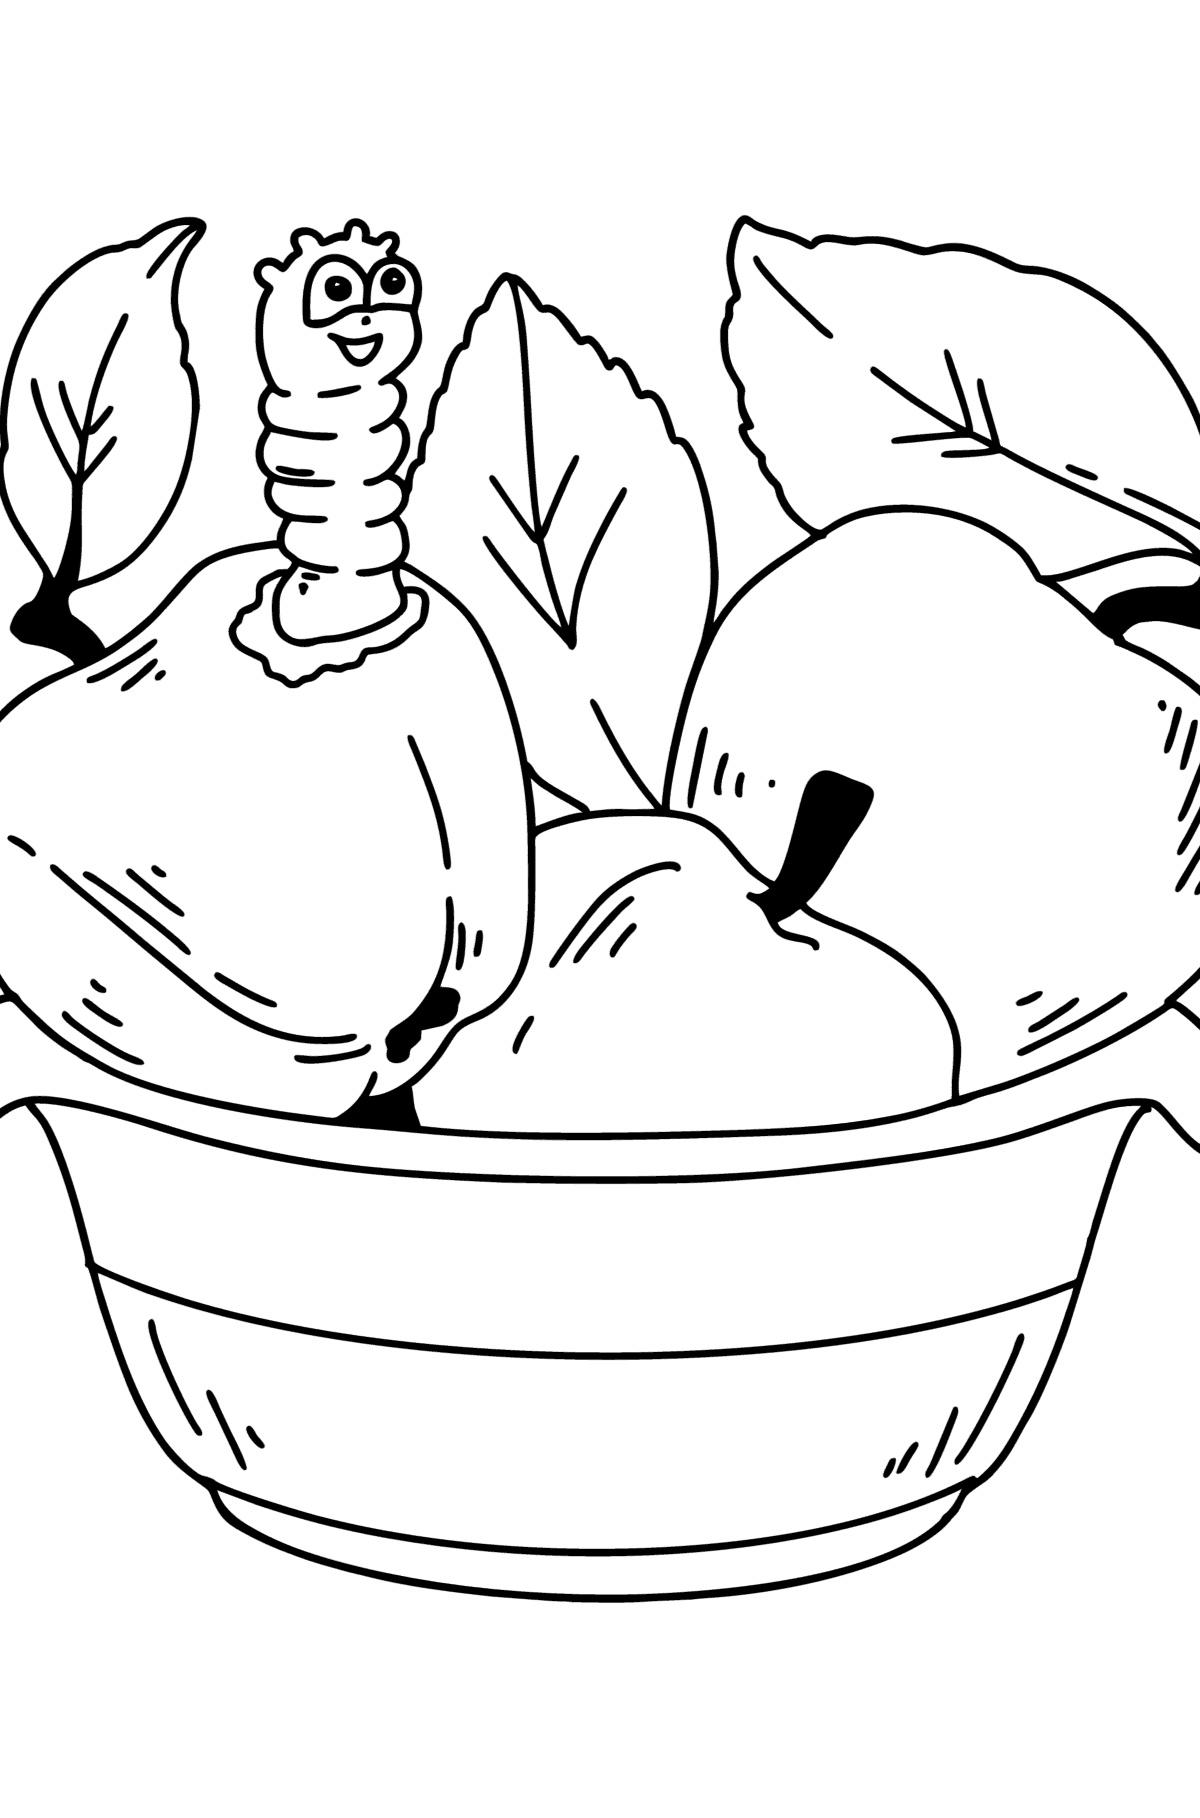 Coloring page Autumn - Apples and Сaterpillar - Coloring Pages for Kids